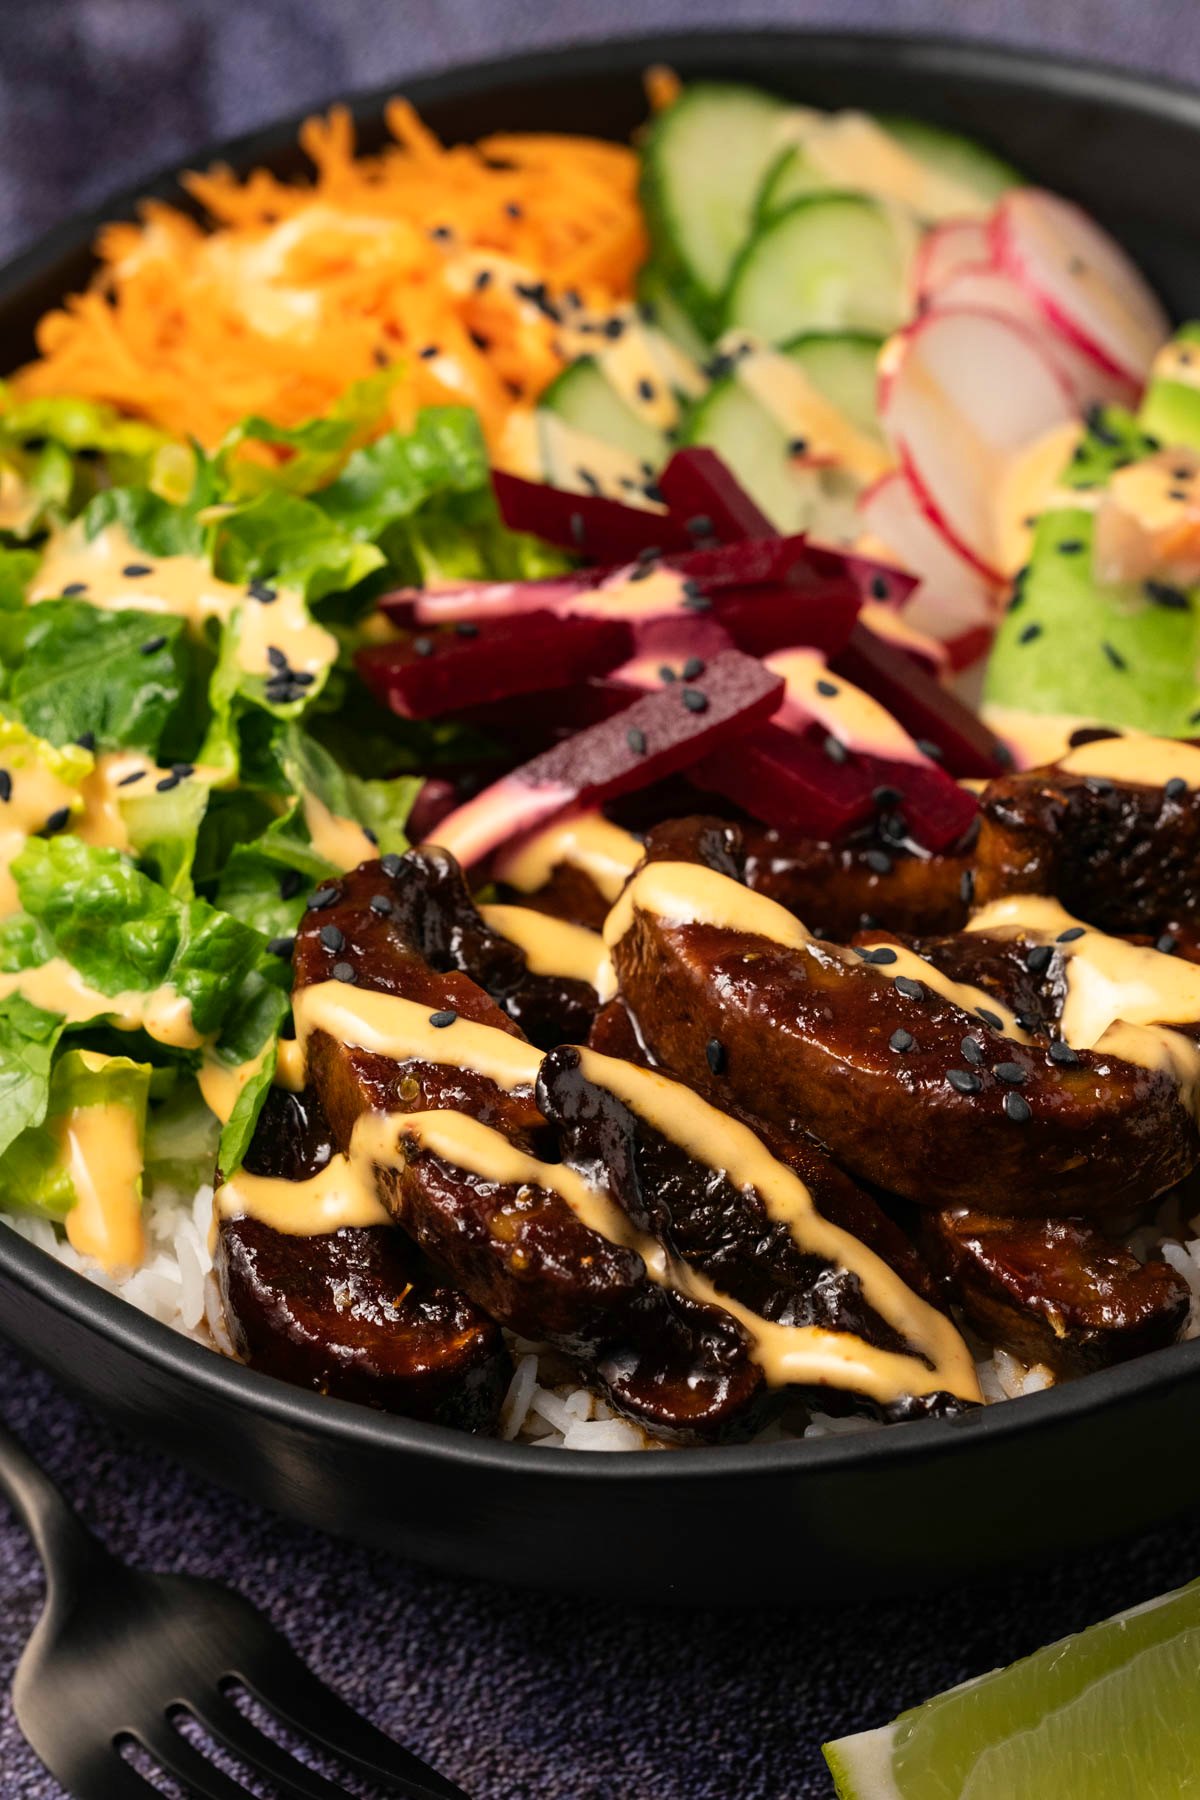 Black bowl filled with mushrooms, salad veggies and rice and drizzled with a creamy dressing. 